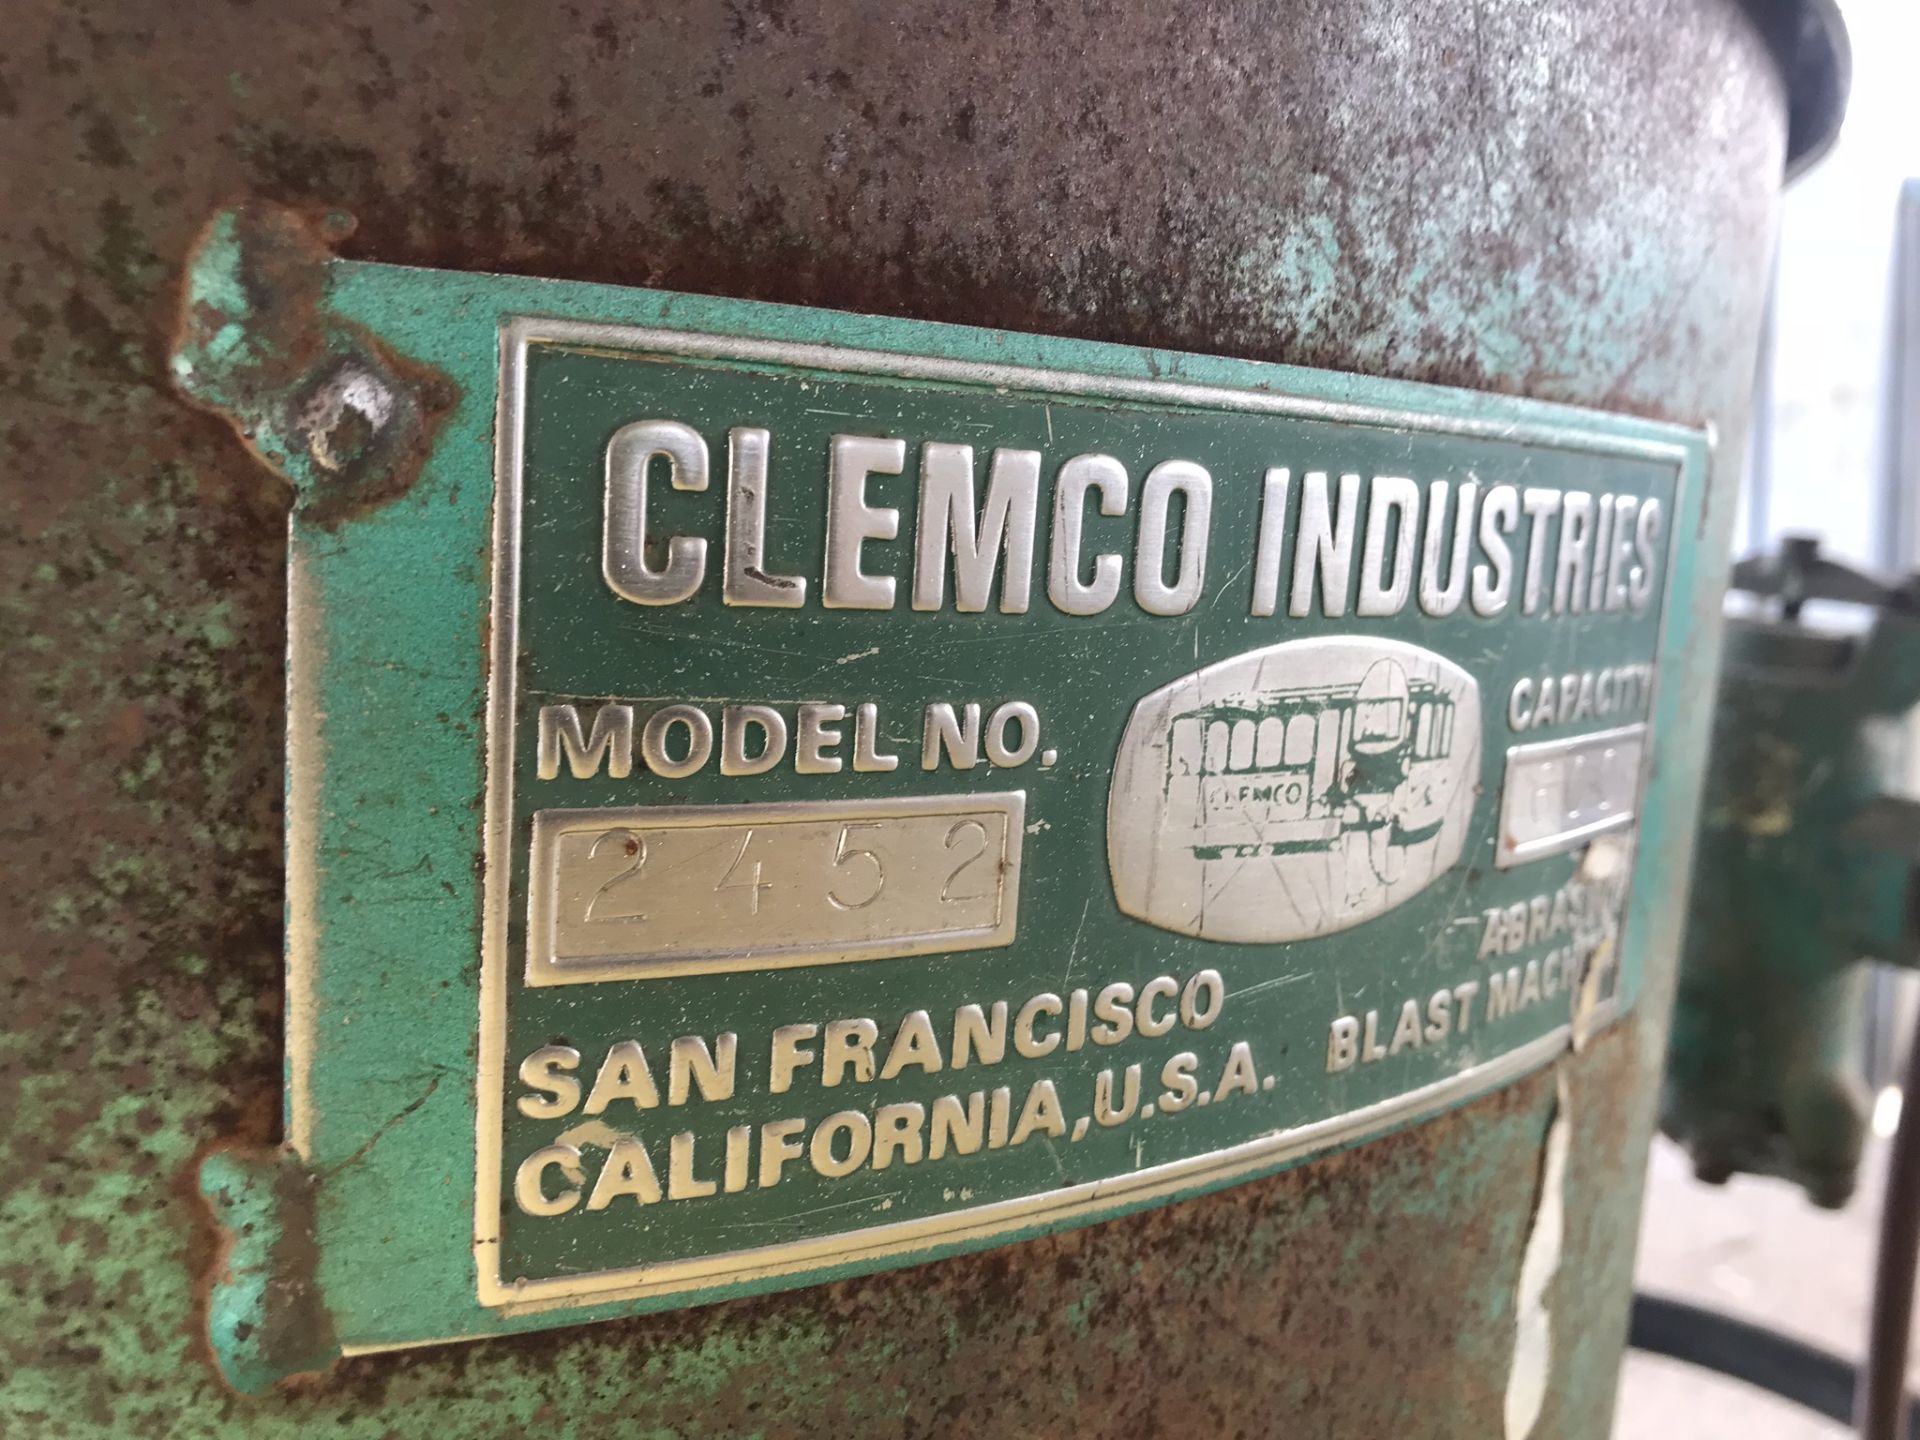 SULLAIR 185H DCP0 JD COMPRESSOR, RATED CAPACITY & PRESS: 185 CFM AT 150 PSIG, W/ CLEMCO IND 2452 - Image 4 of 4